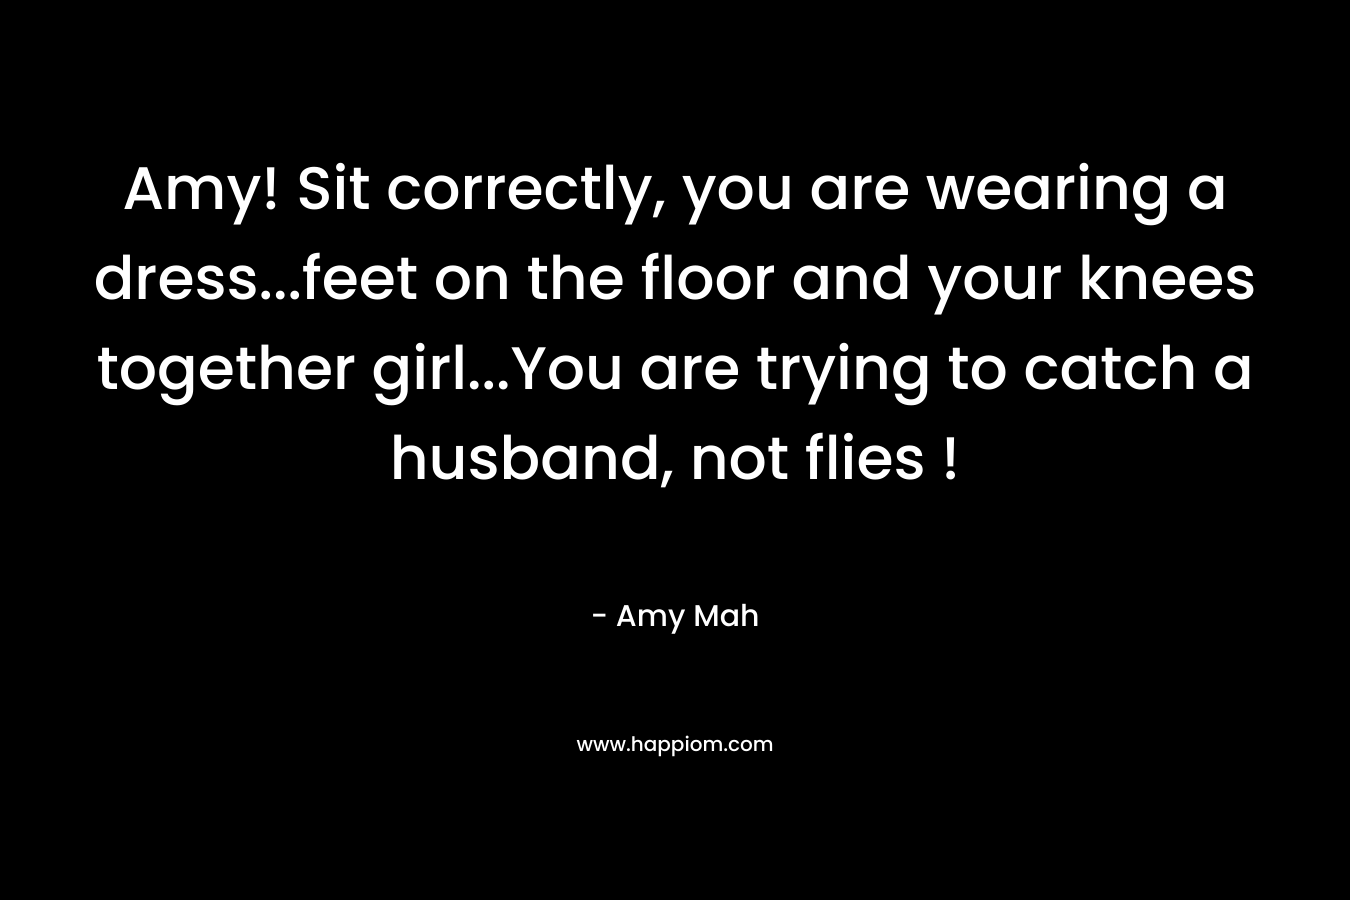 Amy! Sit correctly, you are wearing a dress...feet on the floor and your knees together girl...You are trying to catch a husband, not flies !